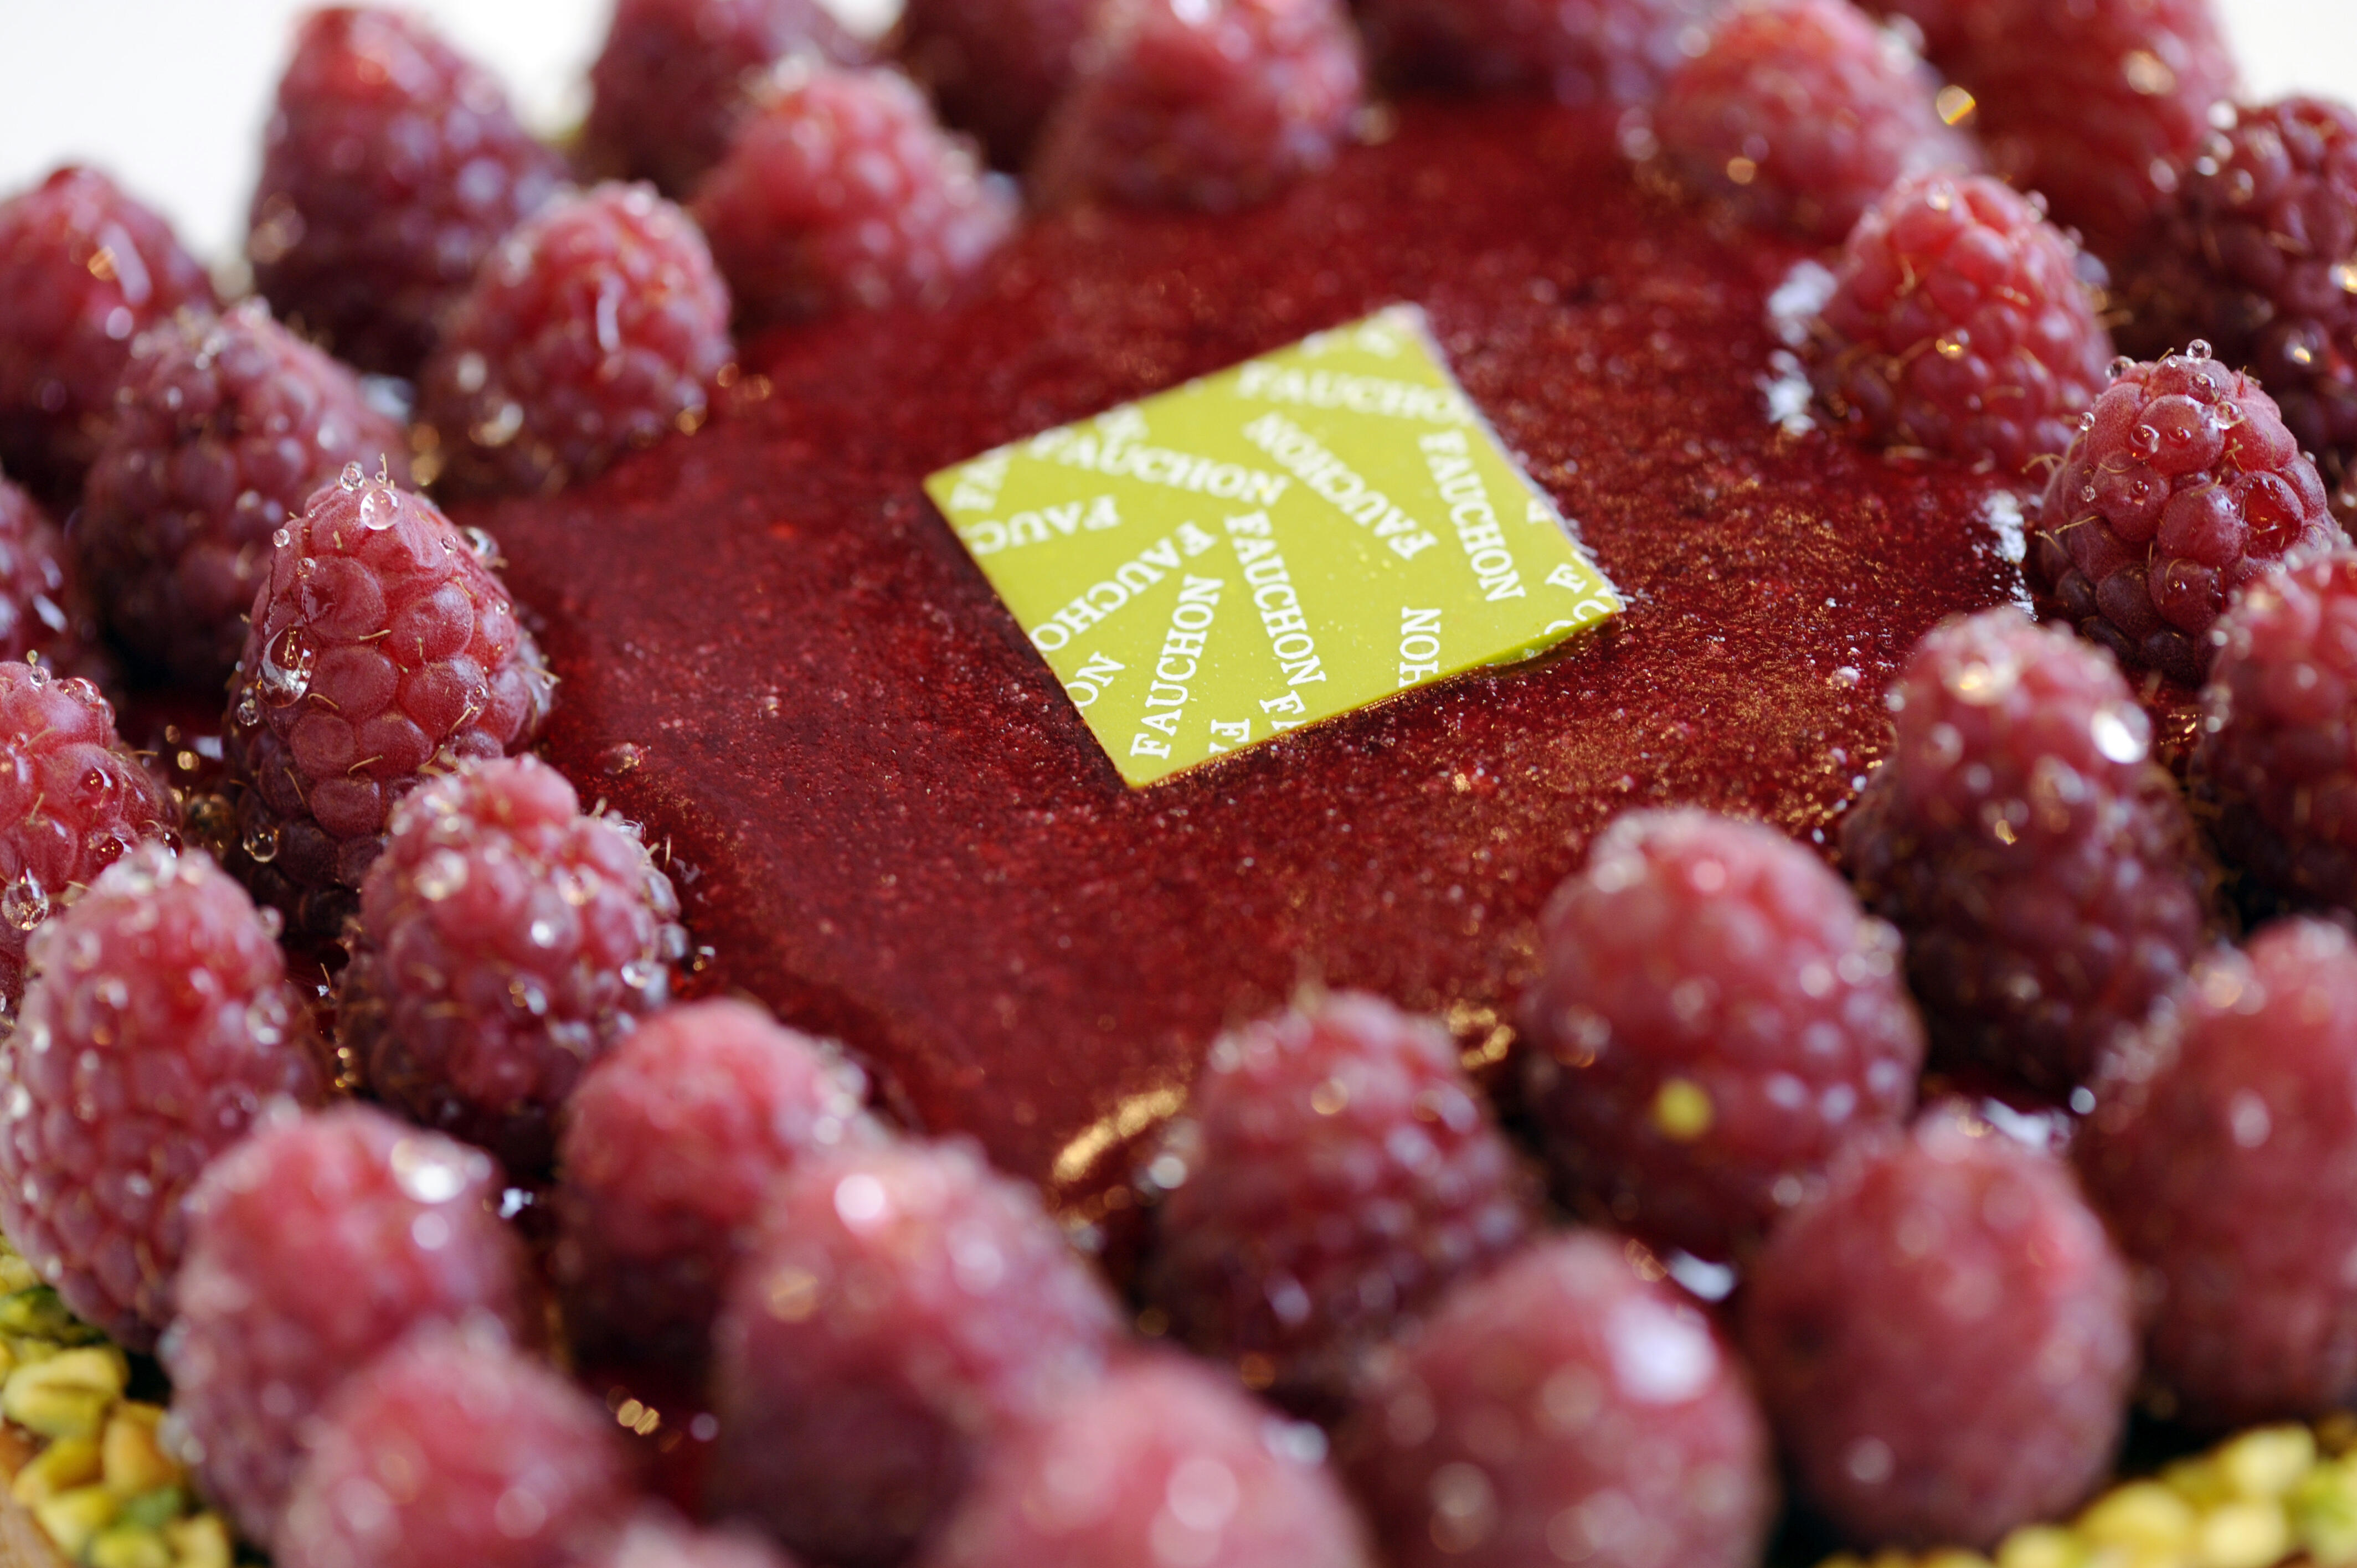 Raspberries pie is pictured at a shop of French gourmet food company Fauchon, on October 27, 2011 in Paris. AFP PHOTO MIGUEL MEDINA (Photo credit should read MIGUEL MEDINA/AFP/Getty Images)